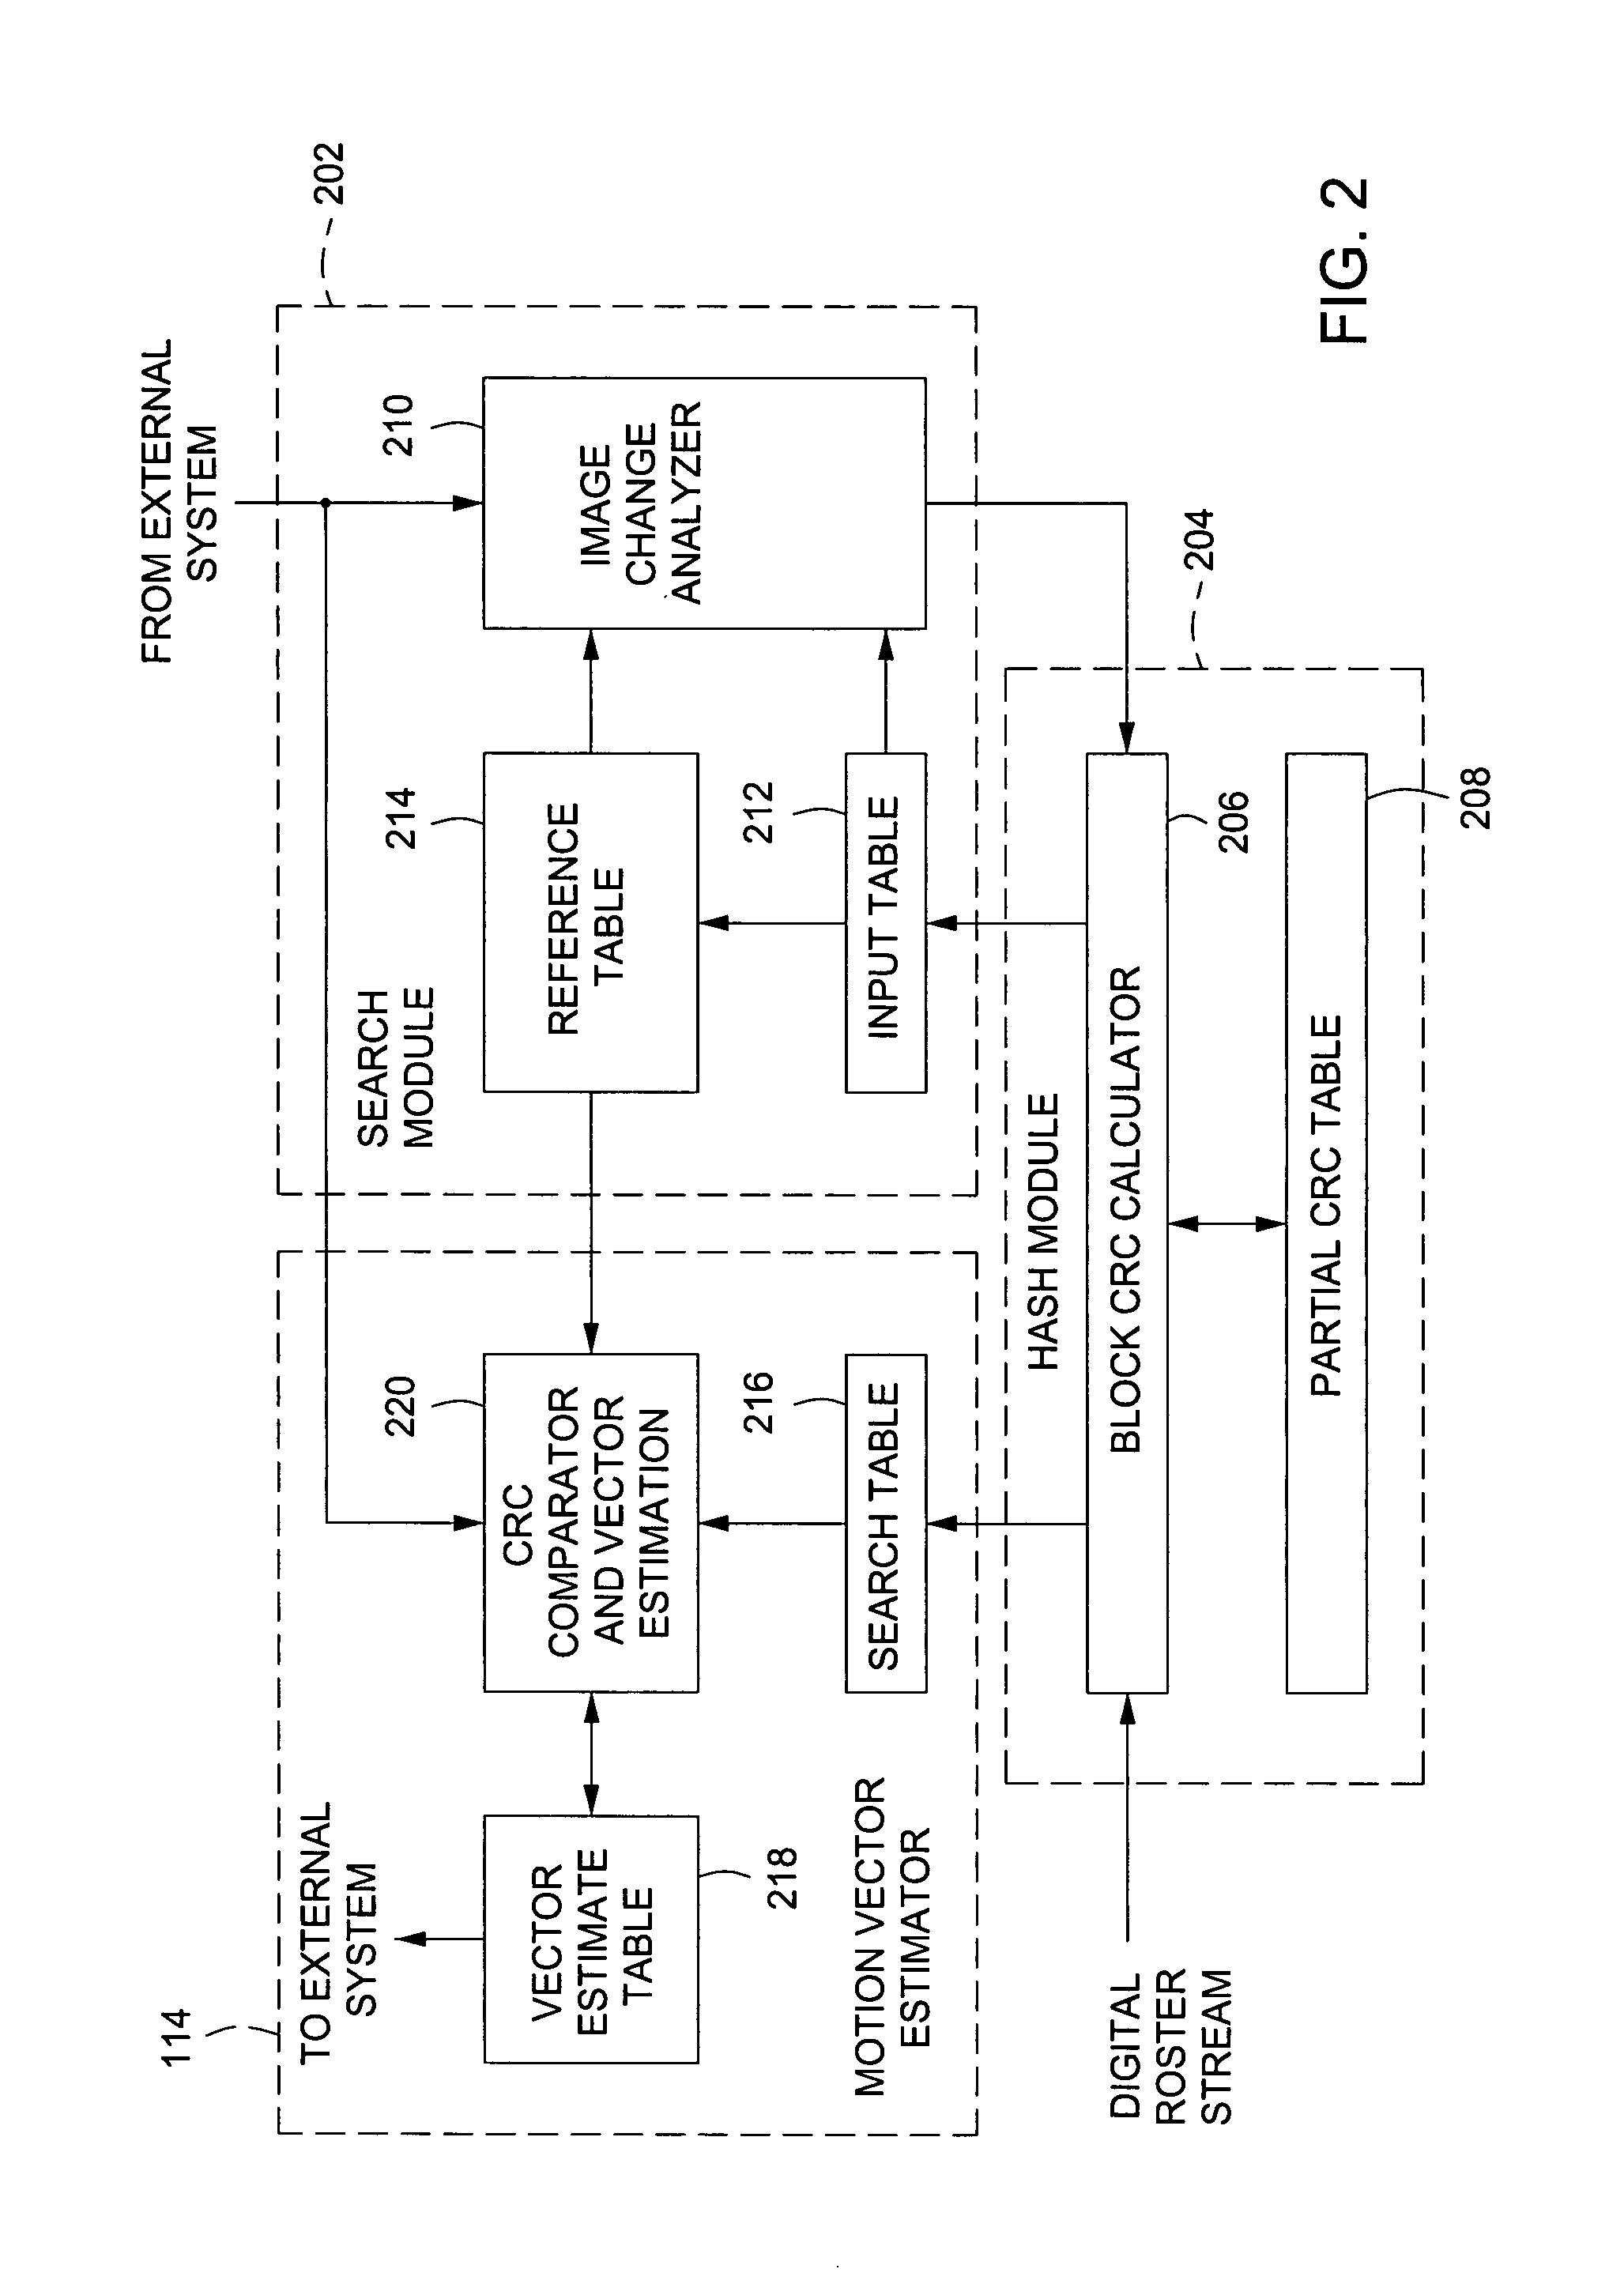 Method and apparatus for motion vector estimation for an image sequence